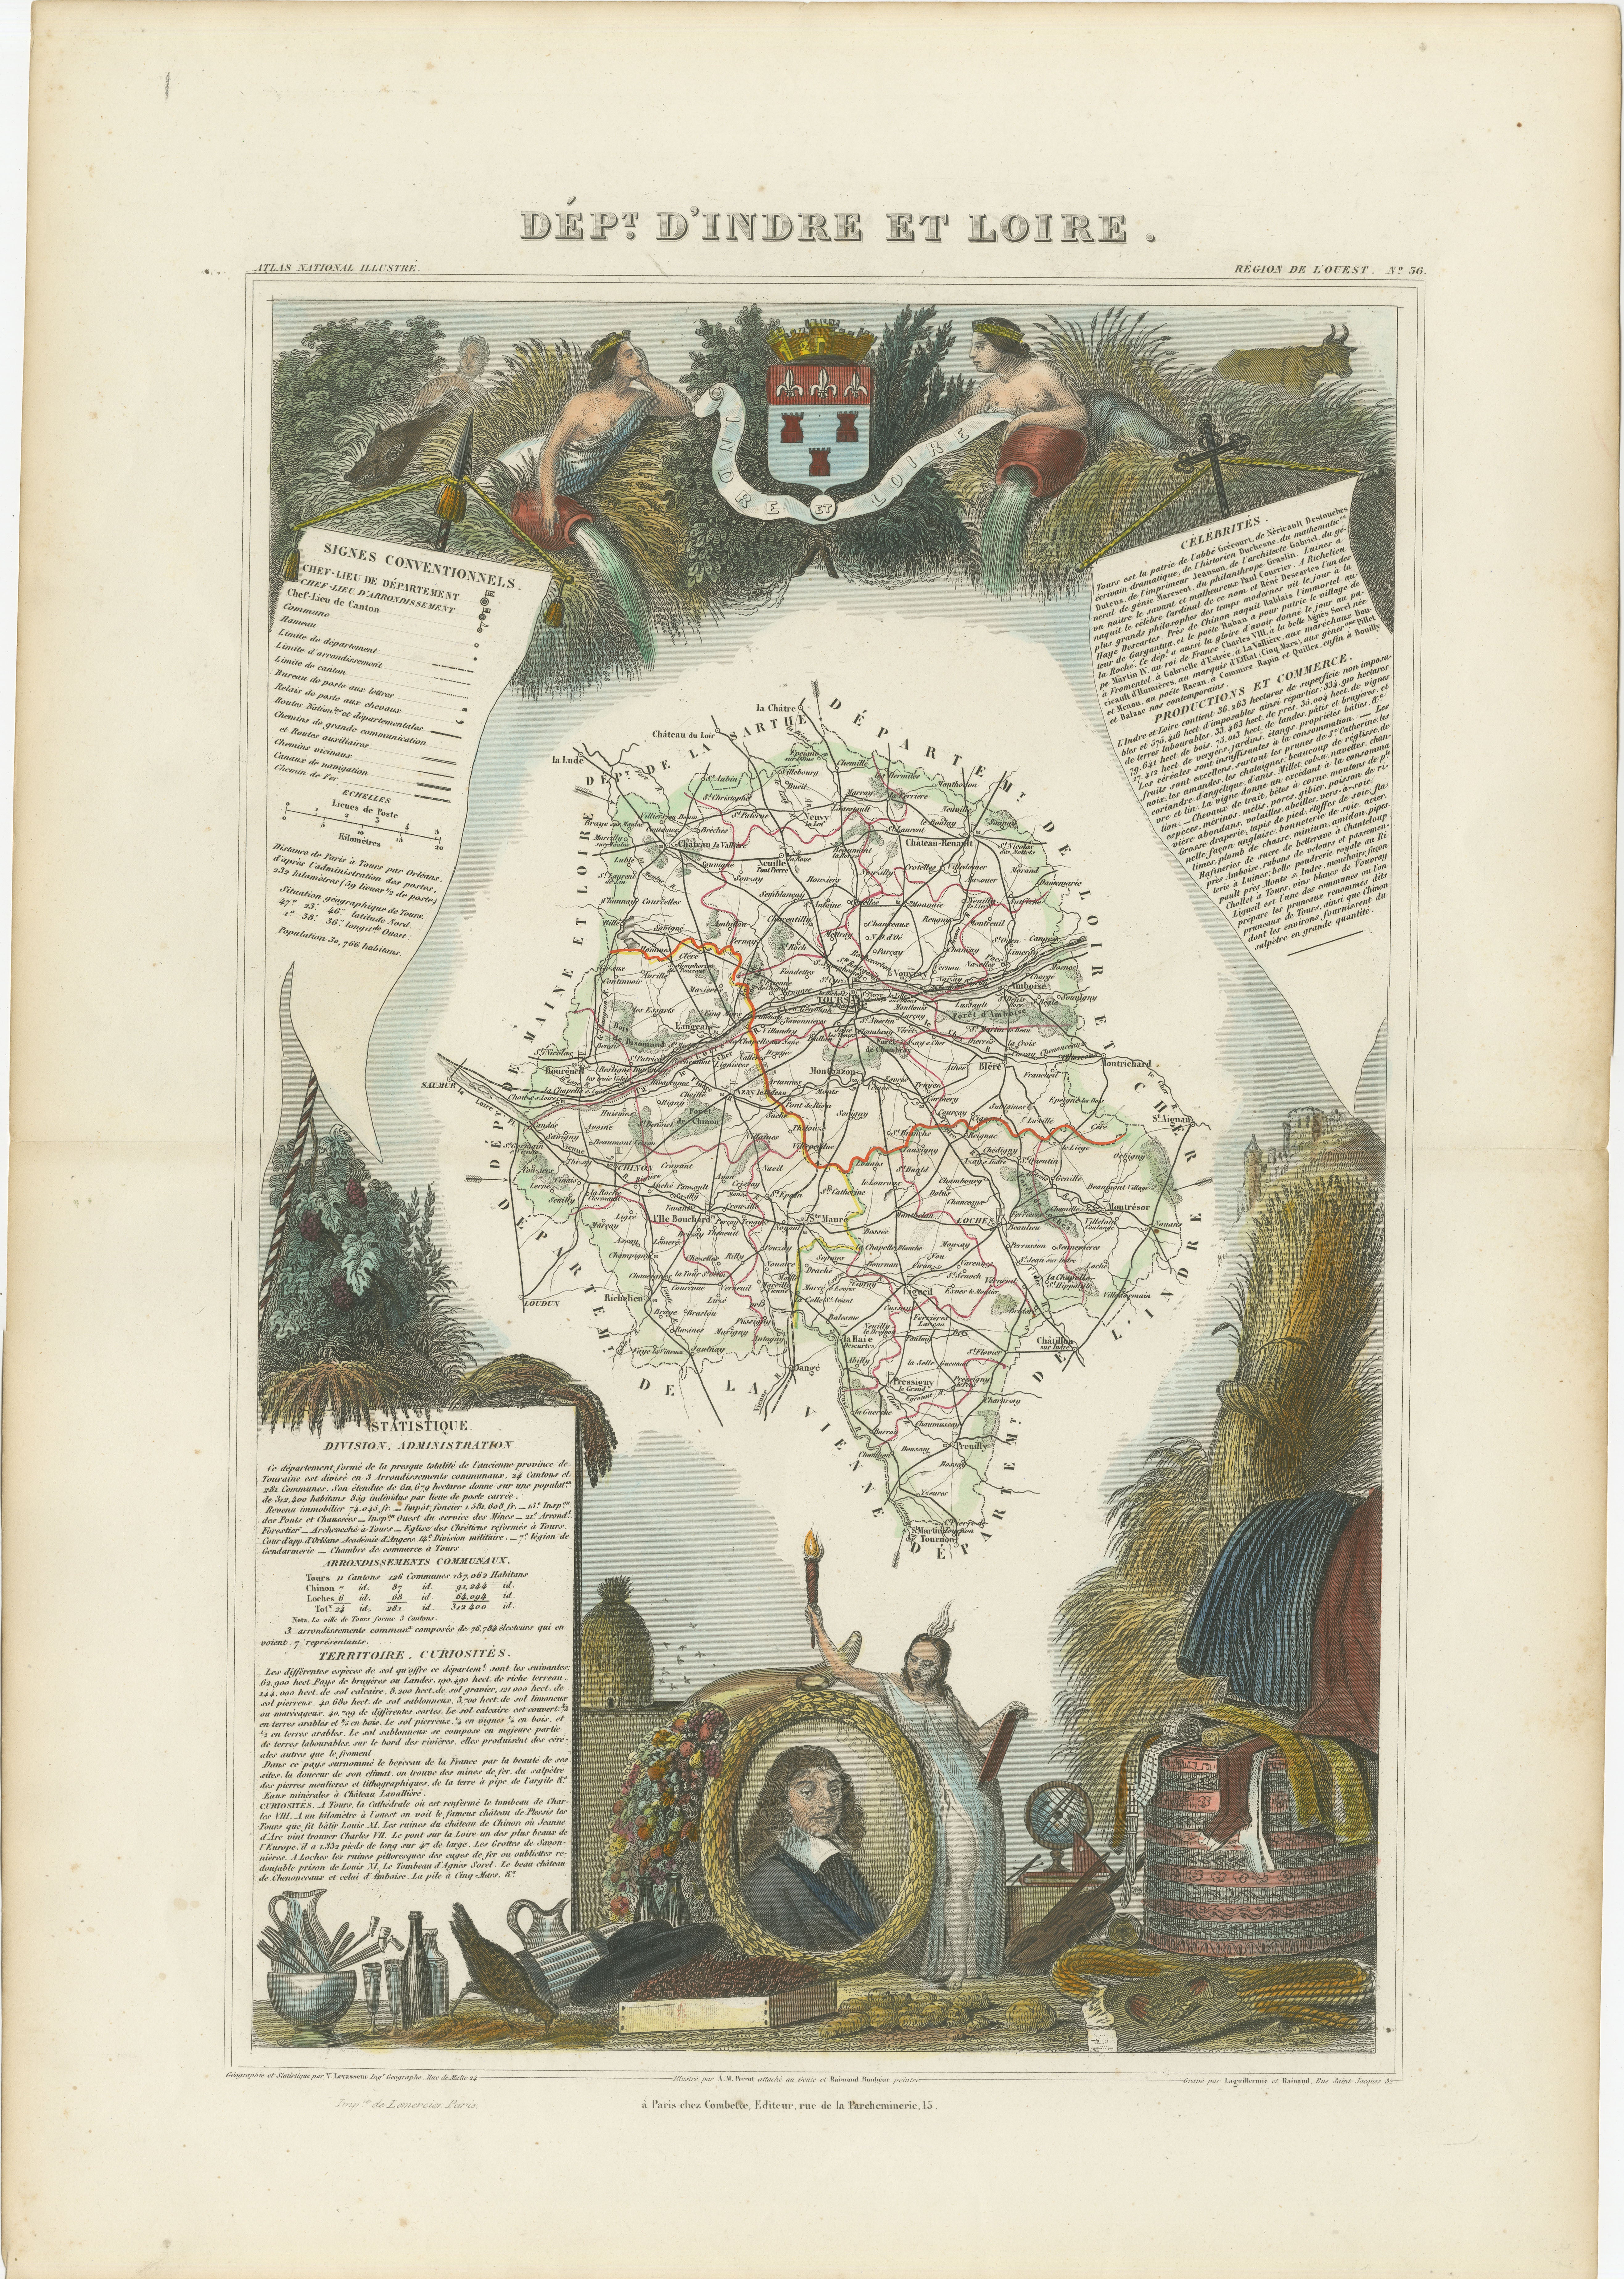 An original hand-colored map of the Département d'Indre-et-Loire created by Victor Levasseur in 1856. As an antique steel engraved map, it showcases the detailed craftsmanship and technology of mid-19th century map making. The method of steel